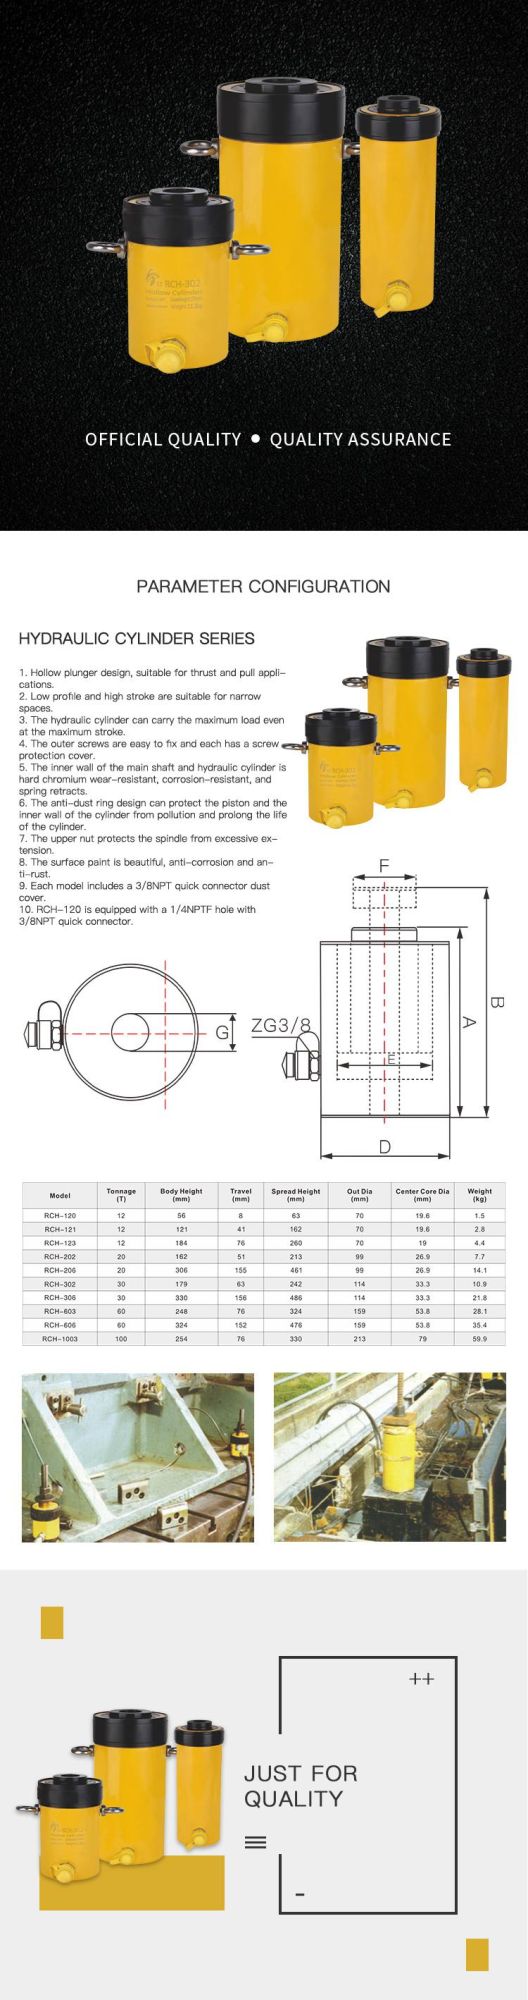 Double Acting Hollow Plunger Hydraulic Jack (RCH-603)